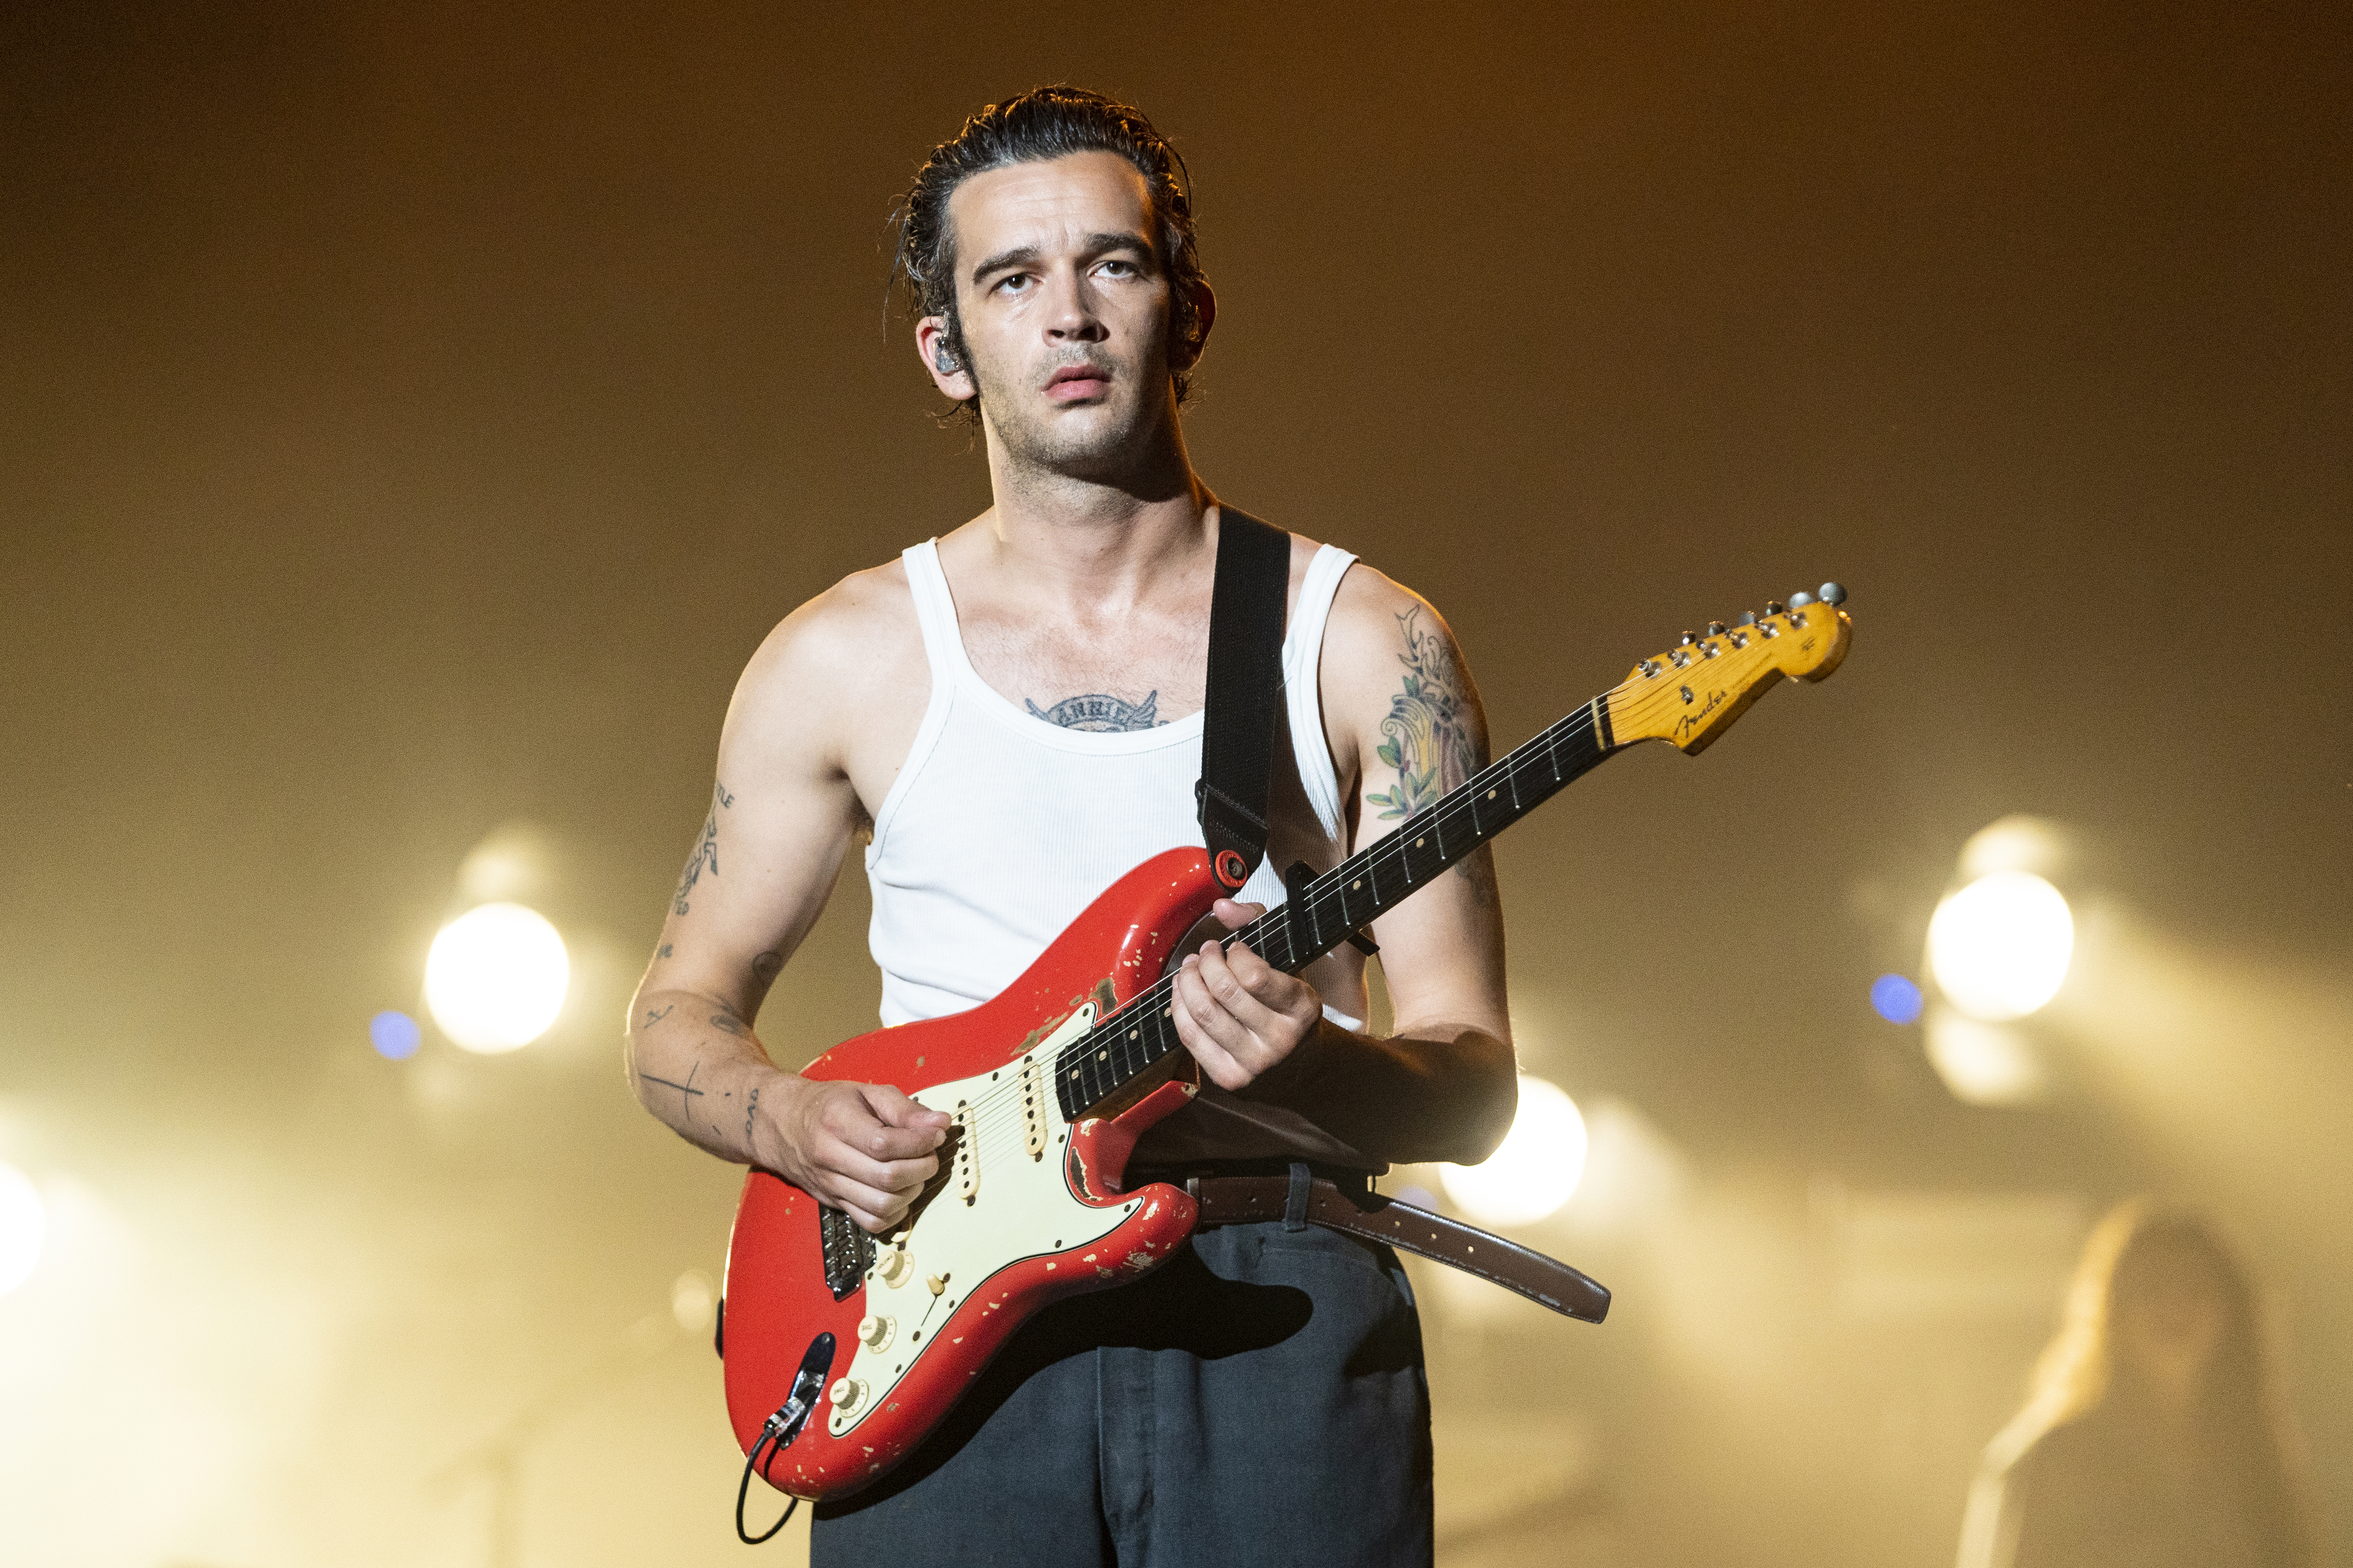 Matty Healy playing the guitar on stage